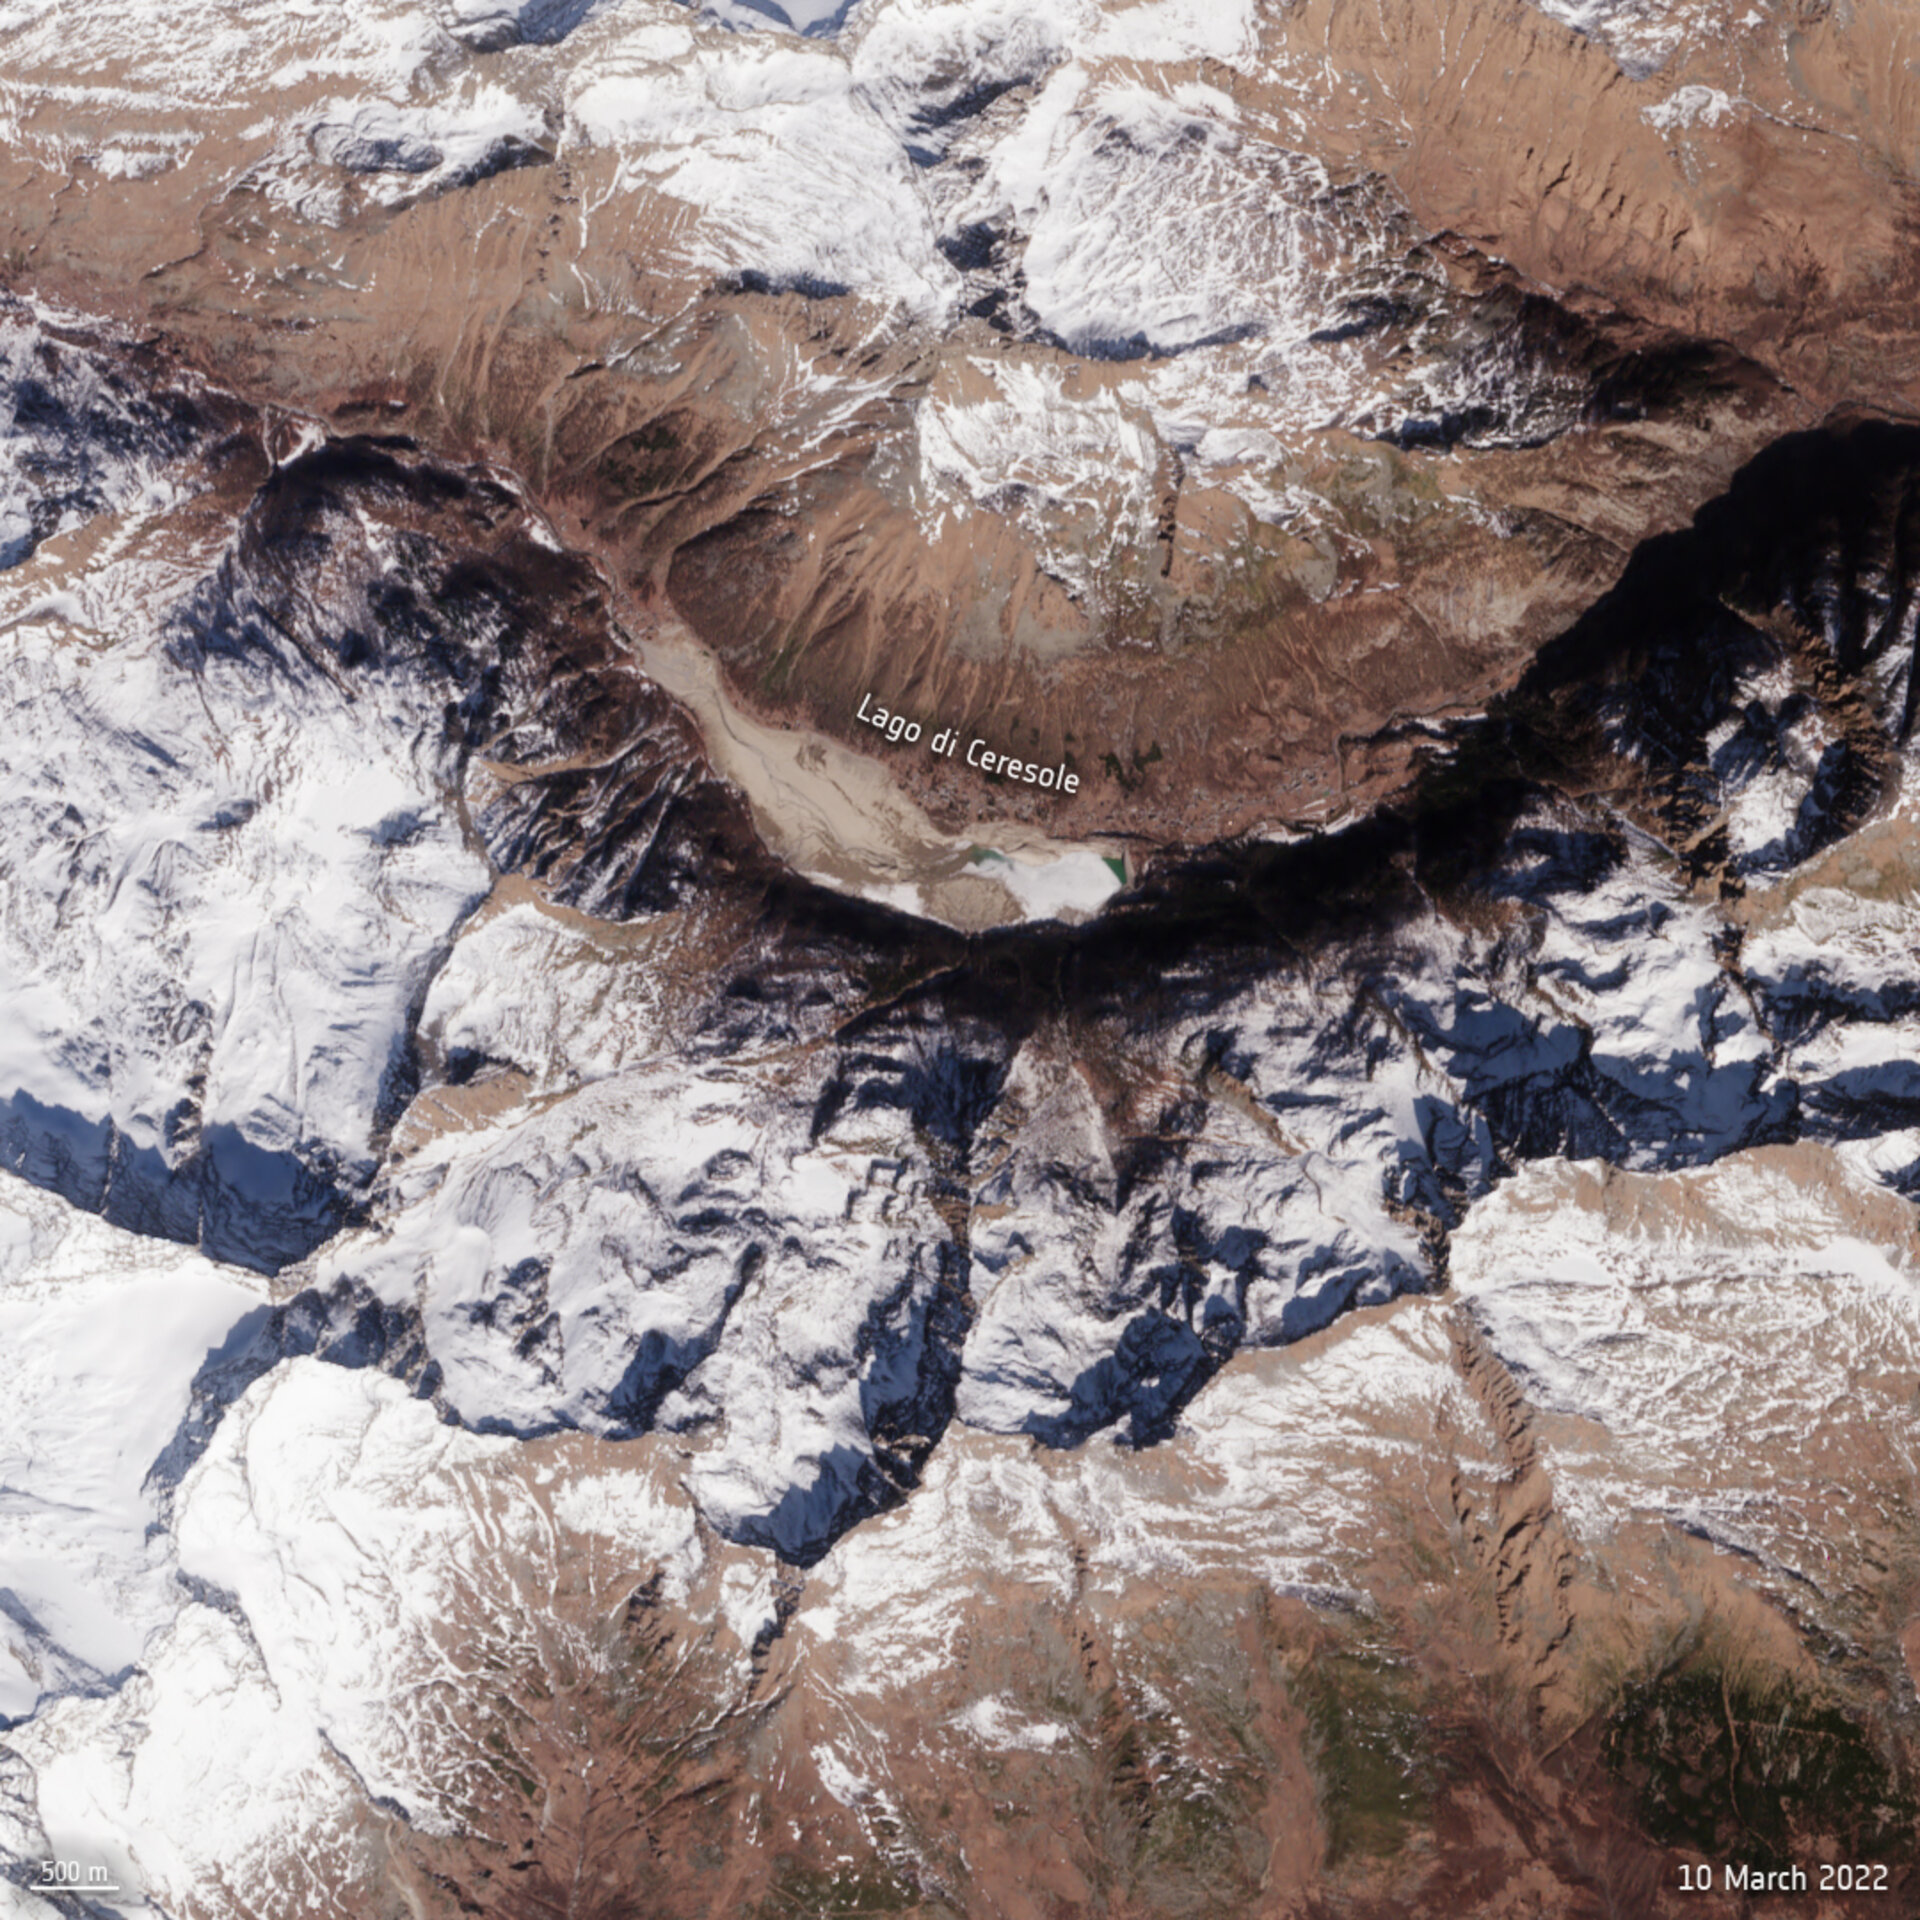 These images captured by Copernicus Sentinel-2 show the frozen lake of Ceresole in March 2021 and, exactly one year later, the large expanse of dry sand in March 2022. 